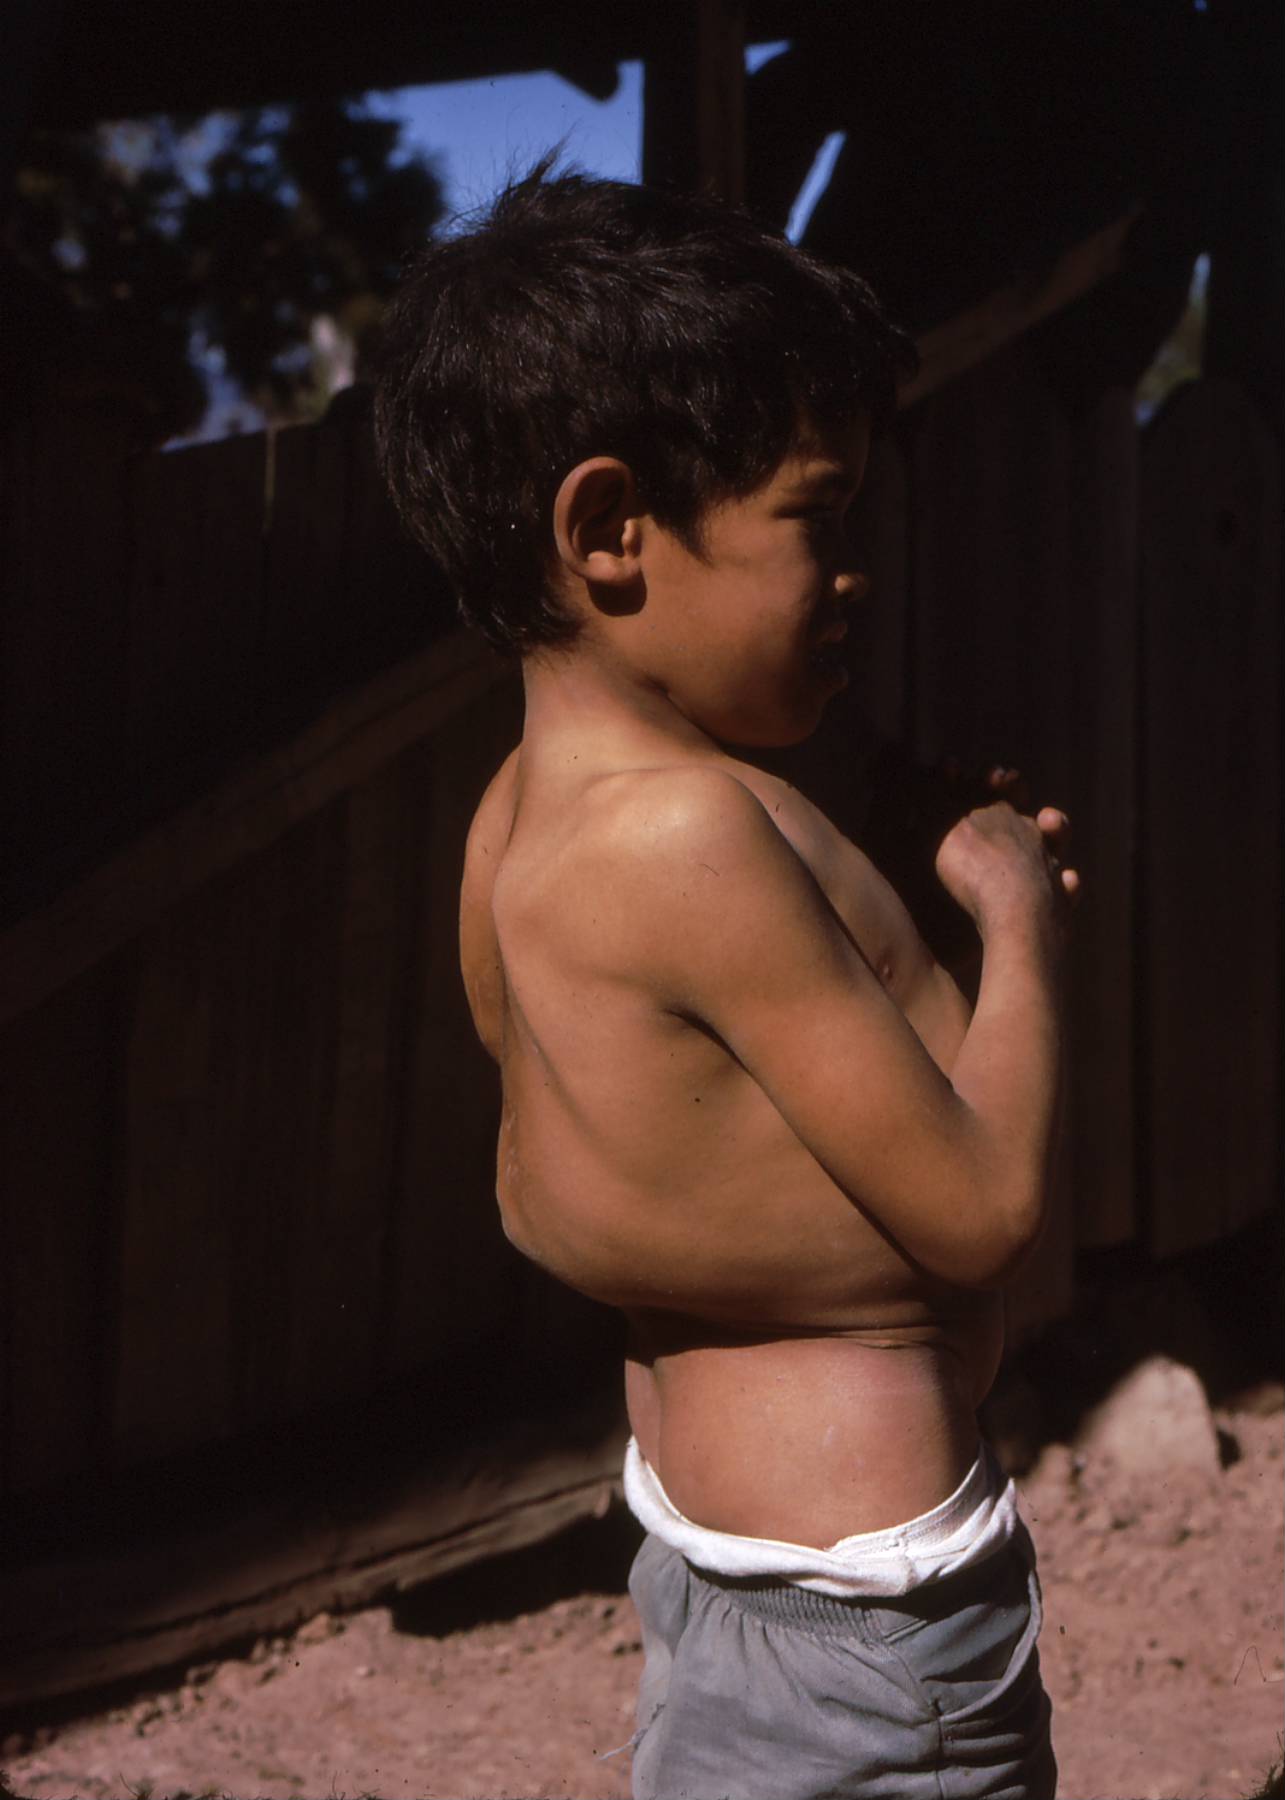 When Project Piaxtla began in the Sierra Madre, tuberculosis was a common, debilitating and often fatal affliction. This boy has Pott's disease, or TB of the spine. Thanks to the vaccination program TB became far less frequent.